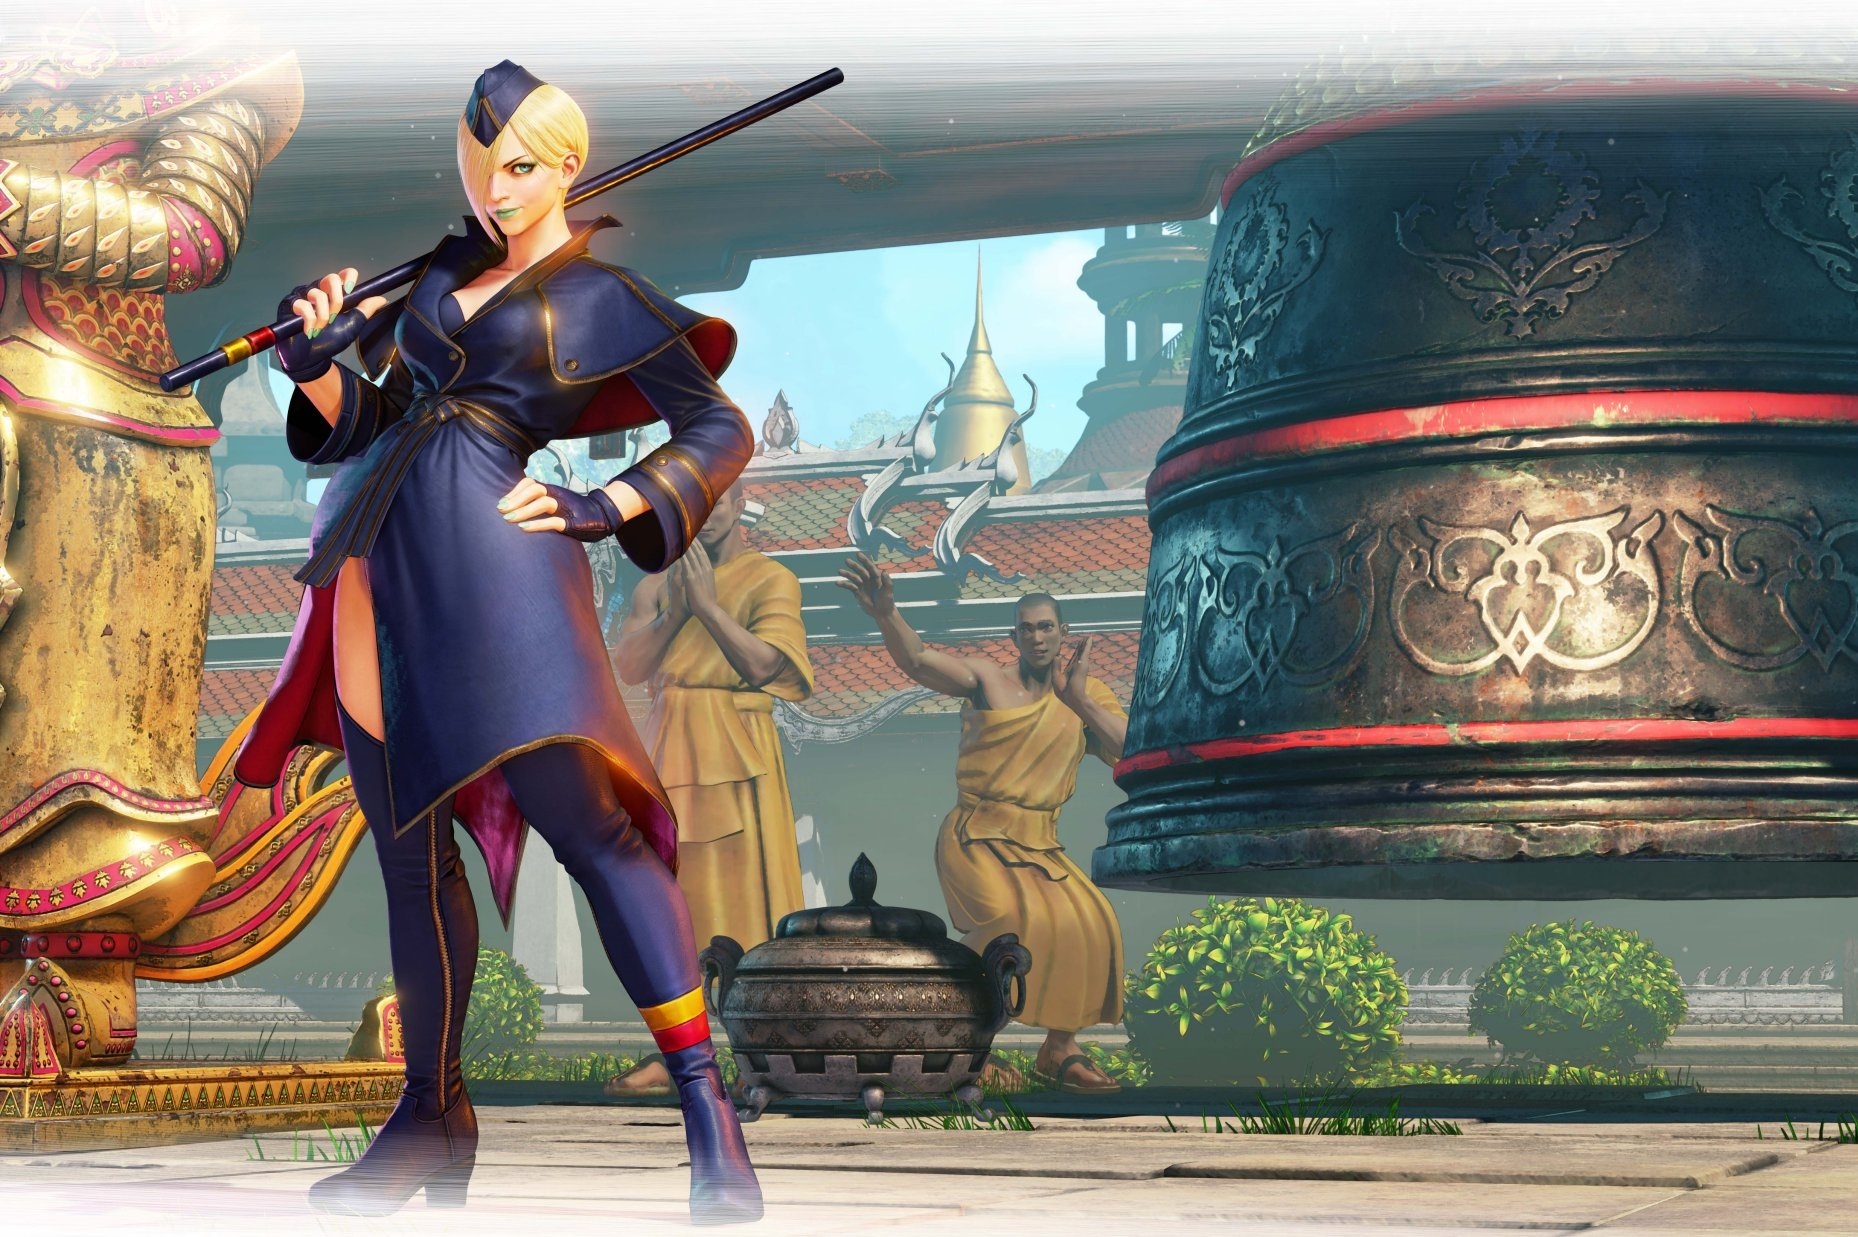 Street Fighter 5's Cammy design seems to have changed